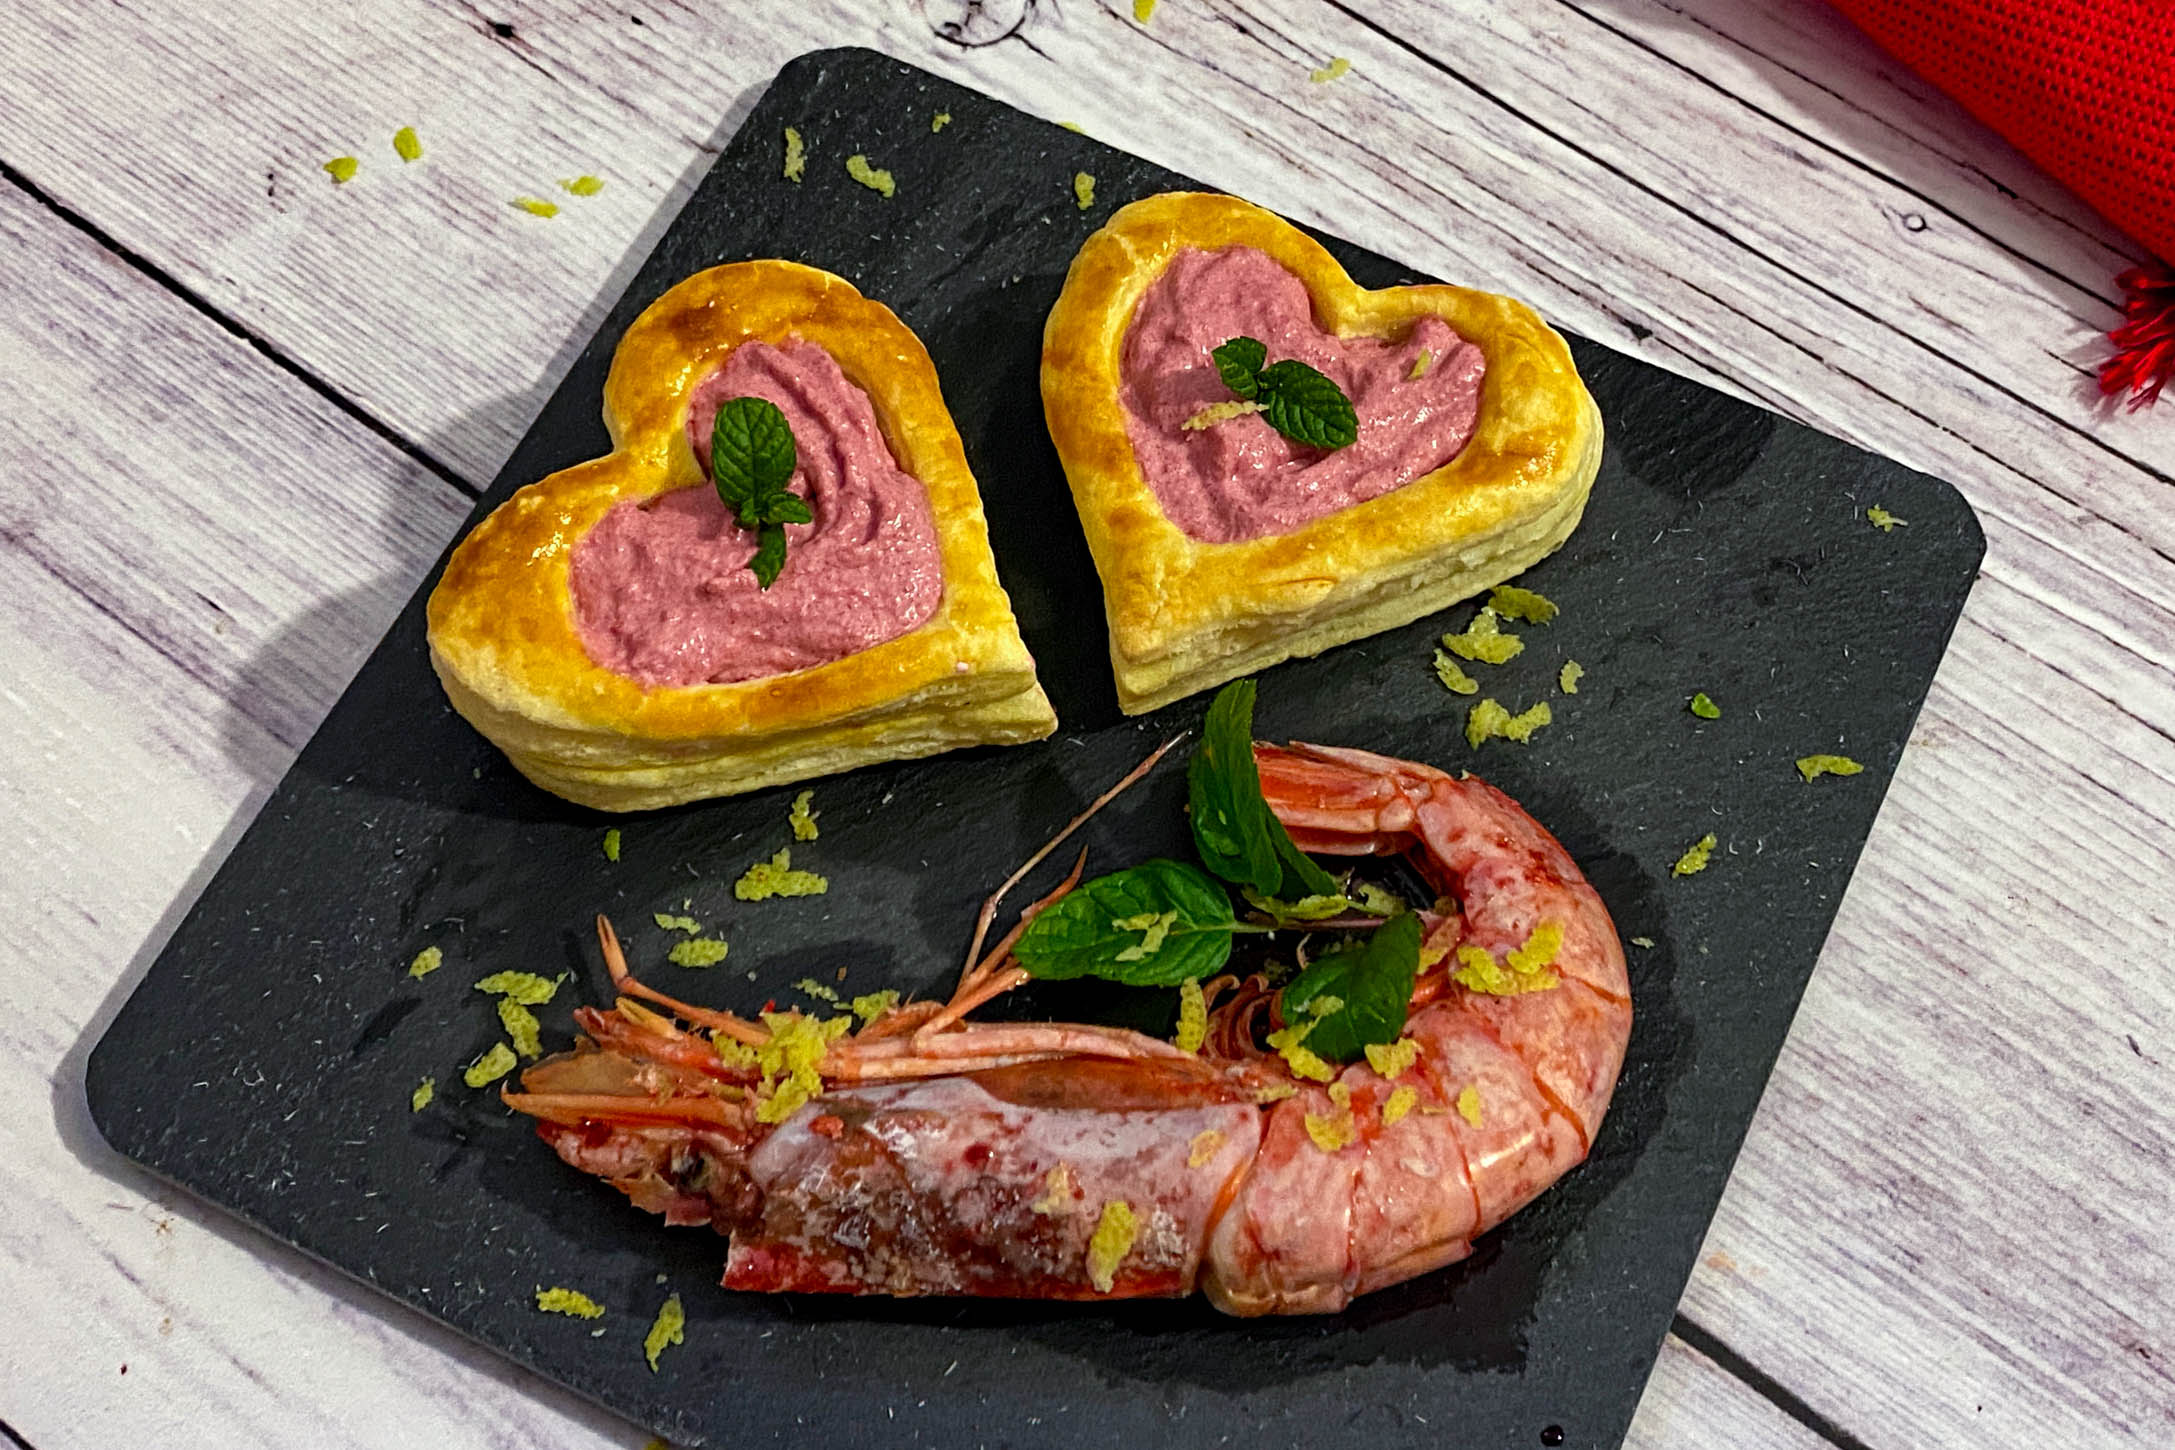 Beetroot hearts and prawns